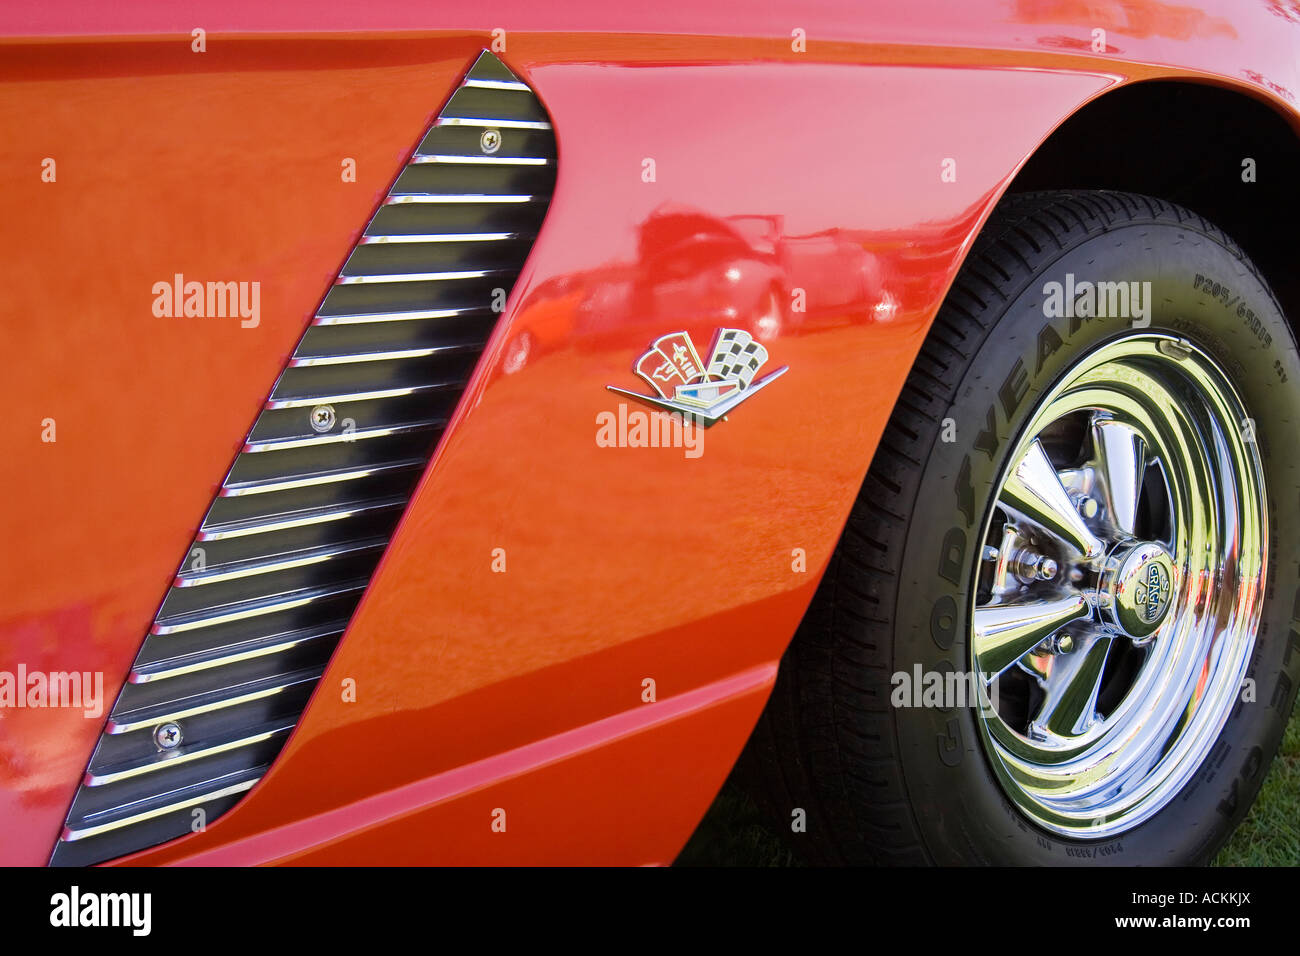 Chrome decoration flags emblem and wheel of a red 1962 Chevrolet Corvette classic car with Goodyear tires at a car show Stock Photo